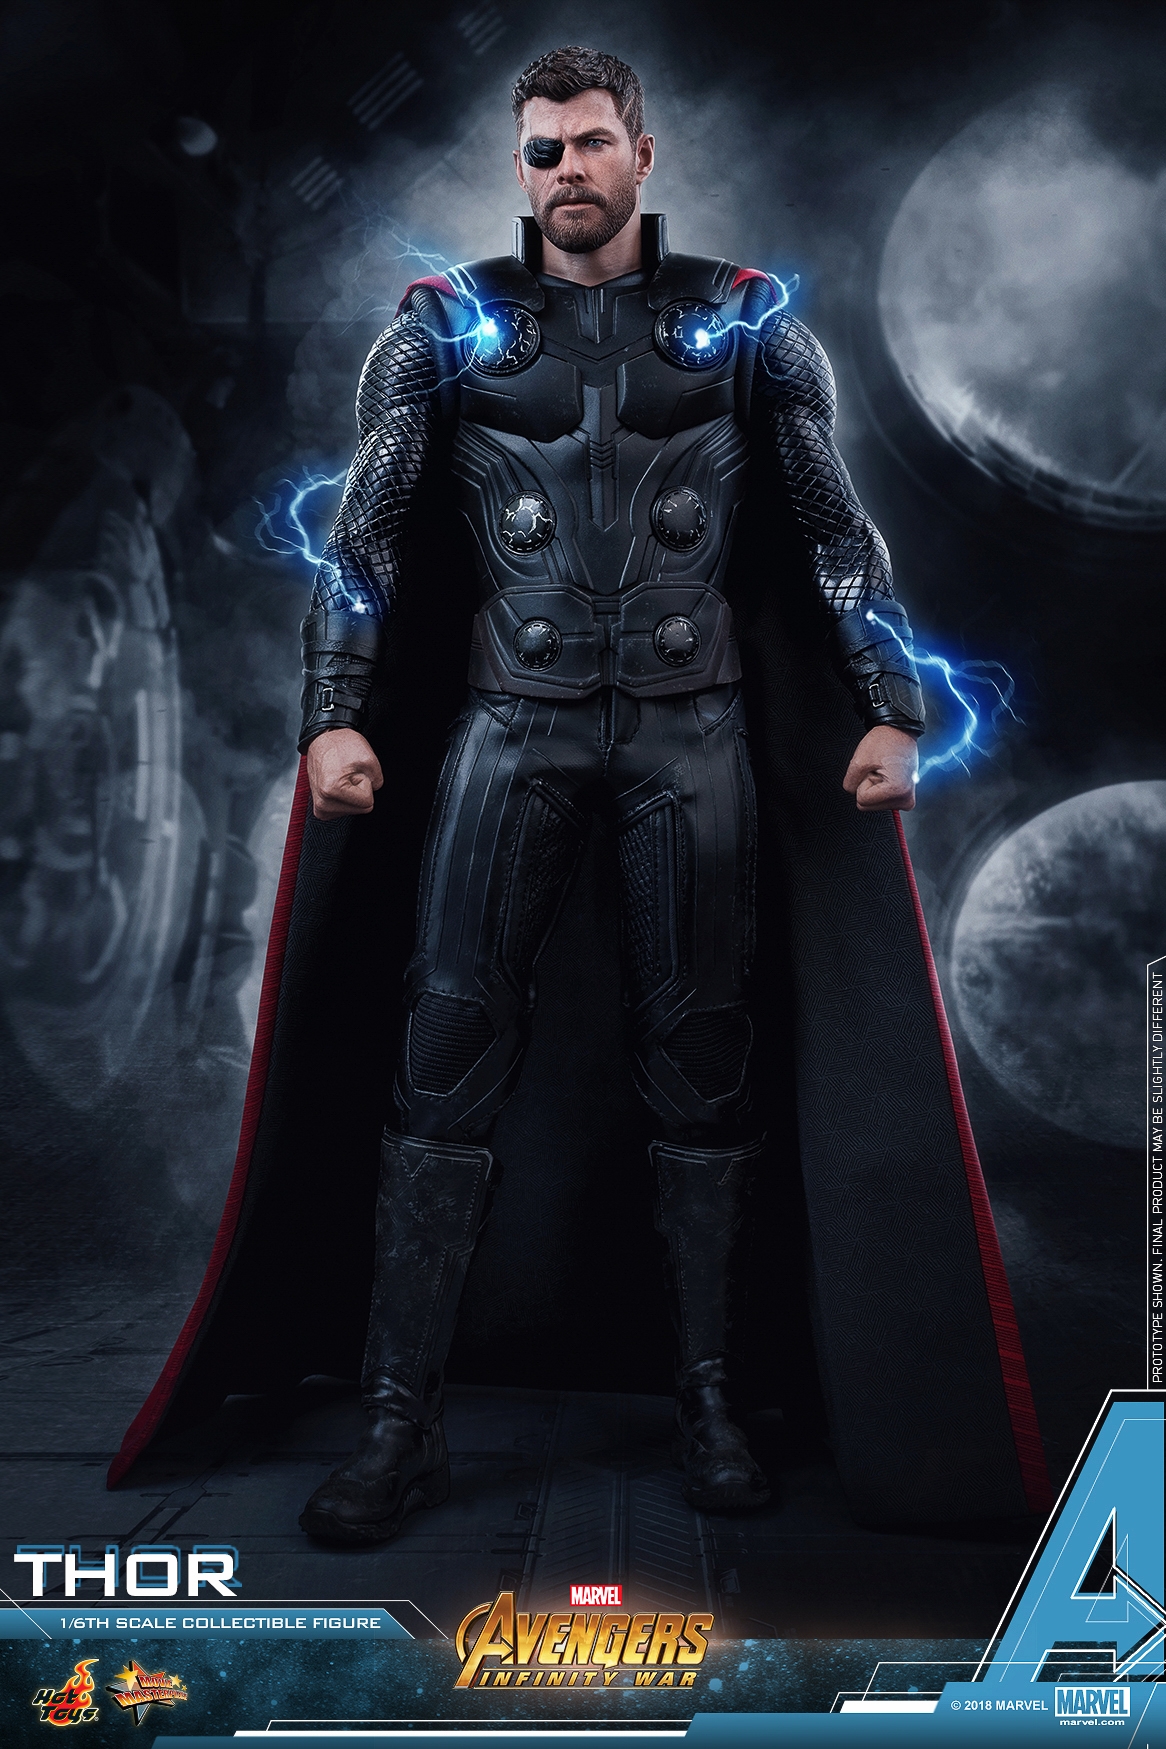 Hot-Toys-MMS474-Avengers-Infinity-War-Thor-Collectible-Figure-002.jpg